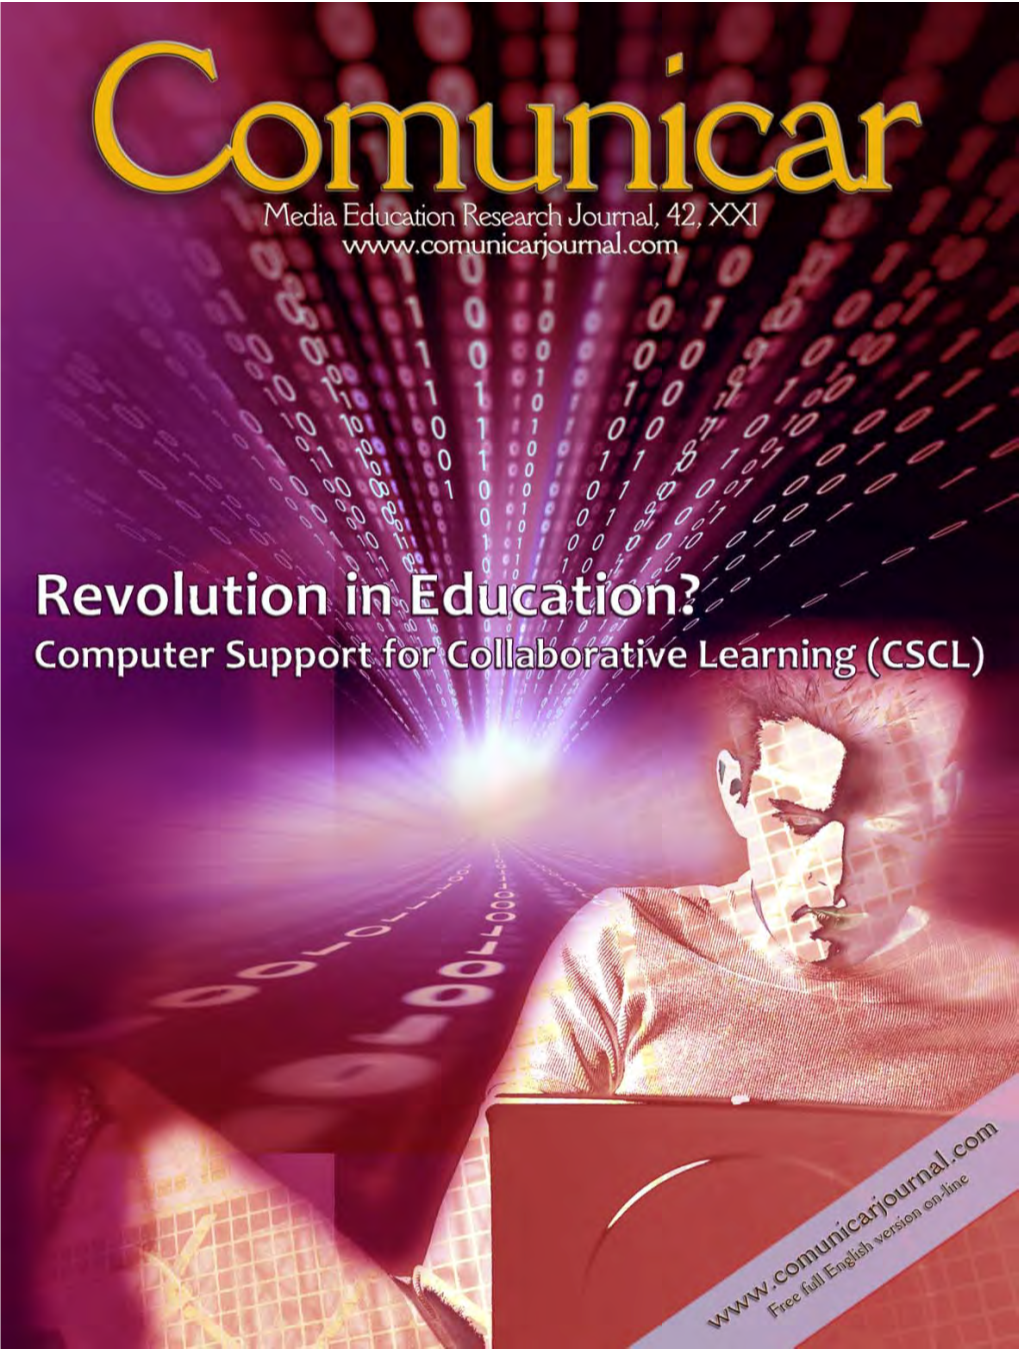 Computer Support for Collaborative Learning (CSCL)